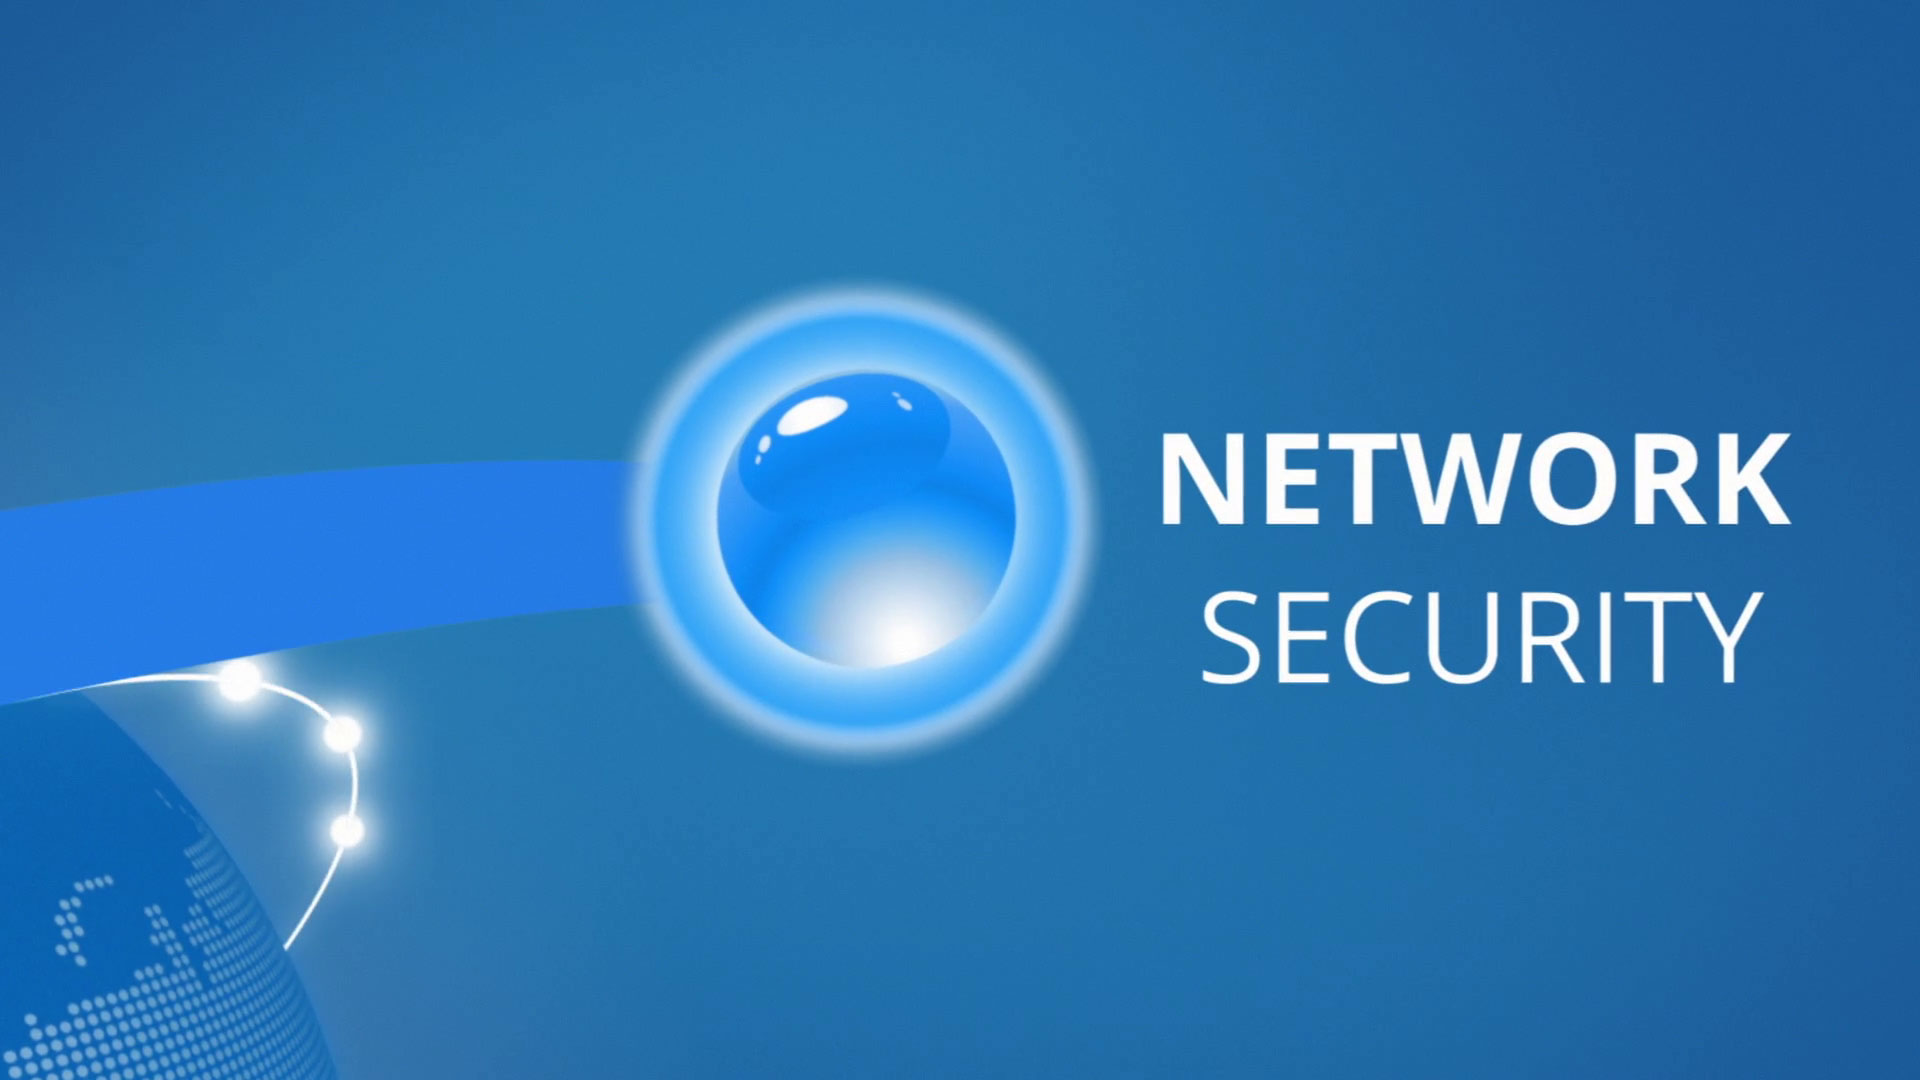 Certified Network Security Engineer- Cnse - Network Security Engineer - HD Wallpaper 